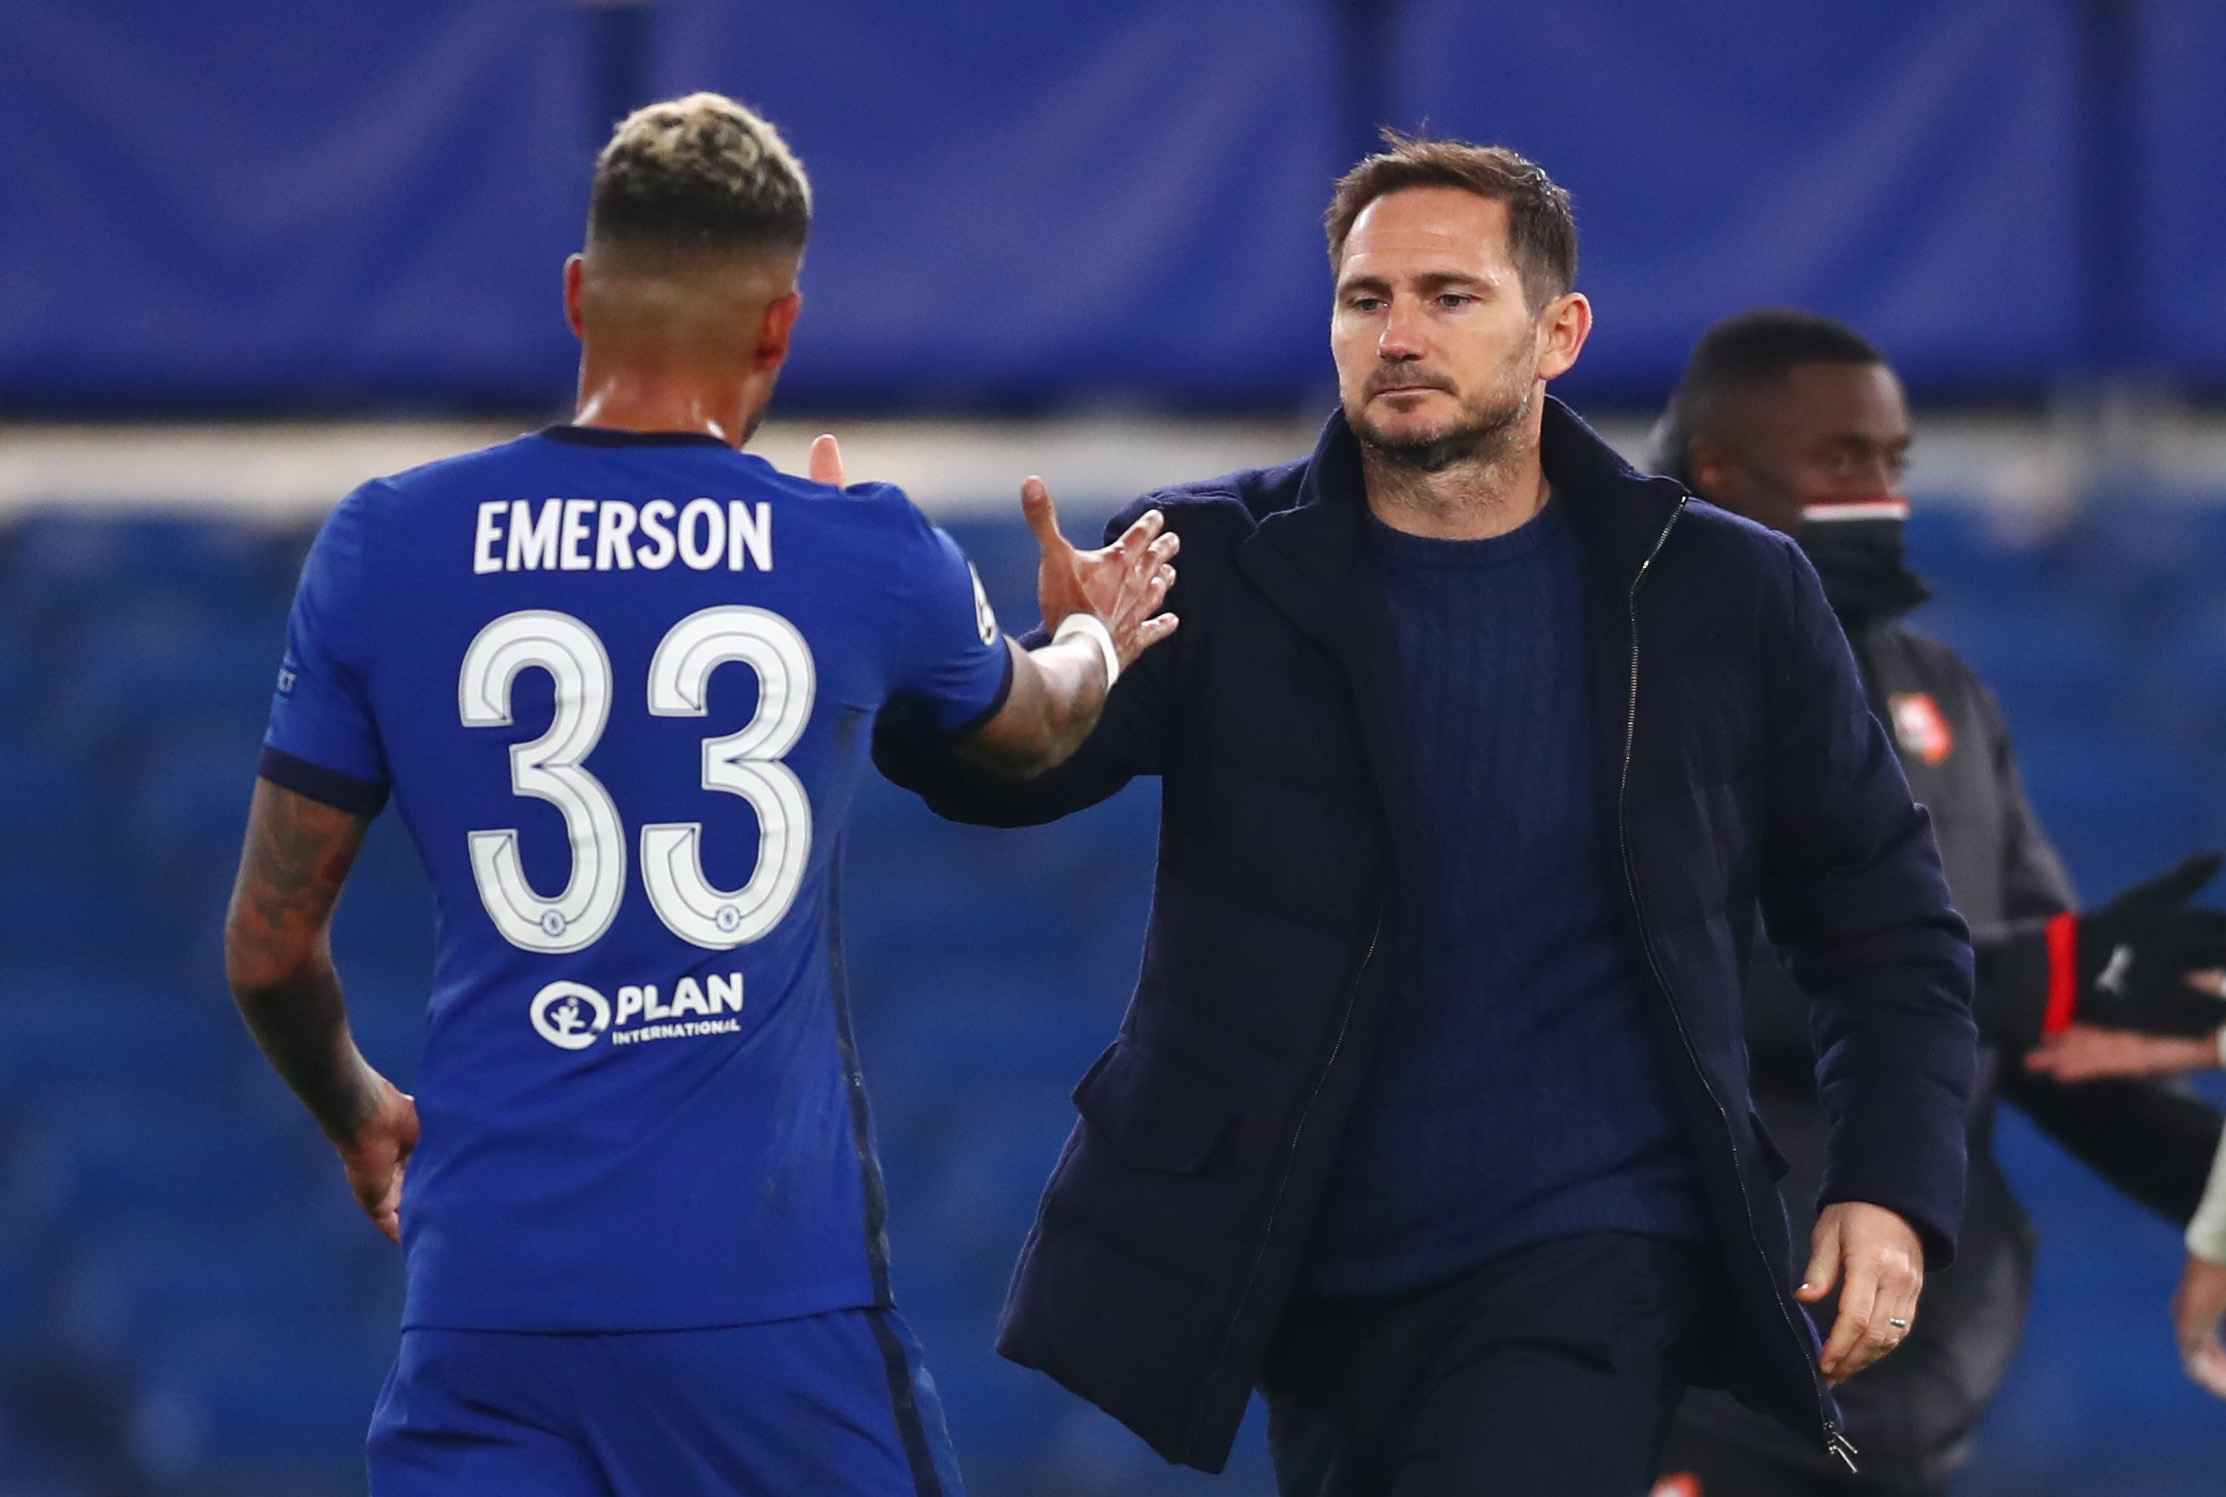 Chelsea manager Frank Lampard with Chelsea's Emerson after the match. Photo: Reuters